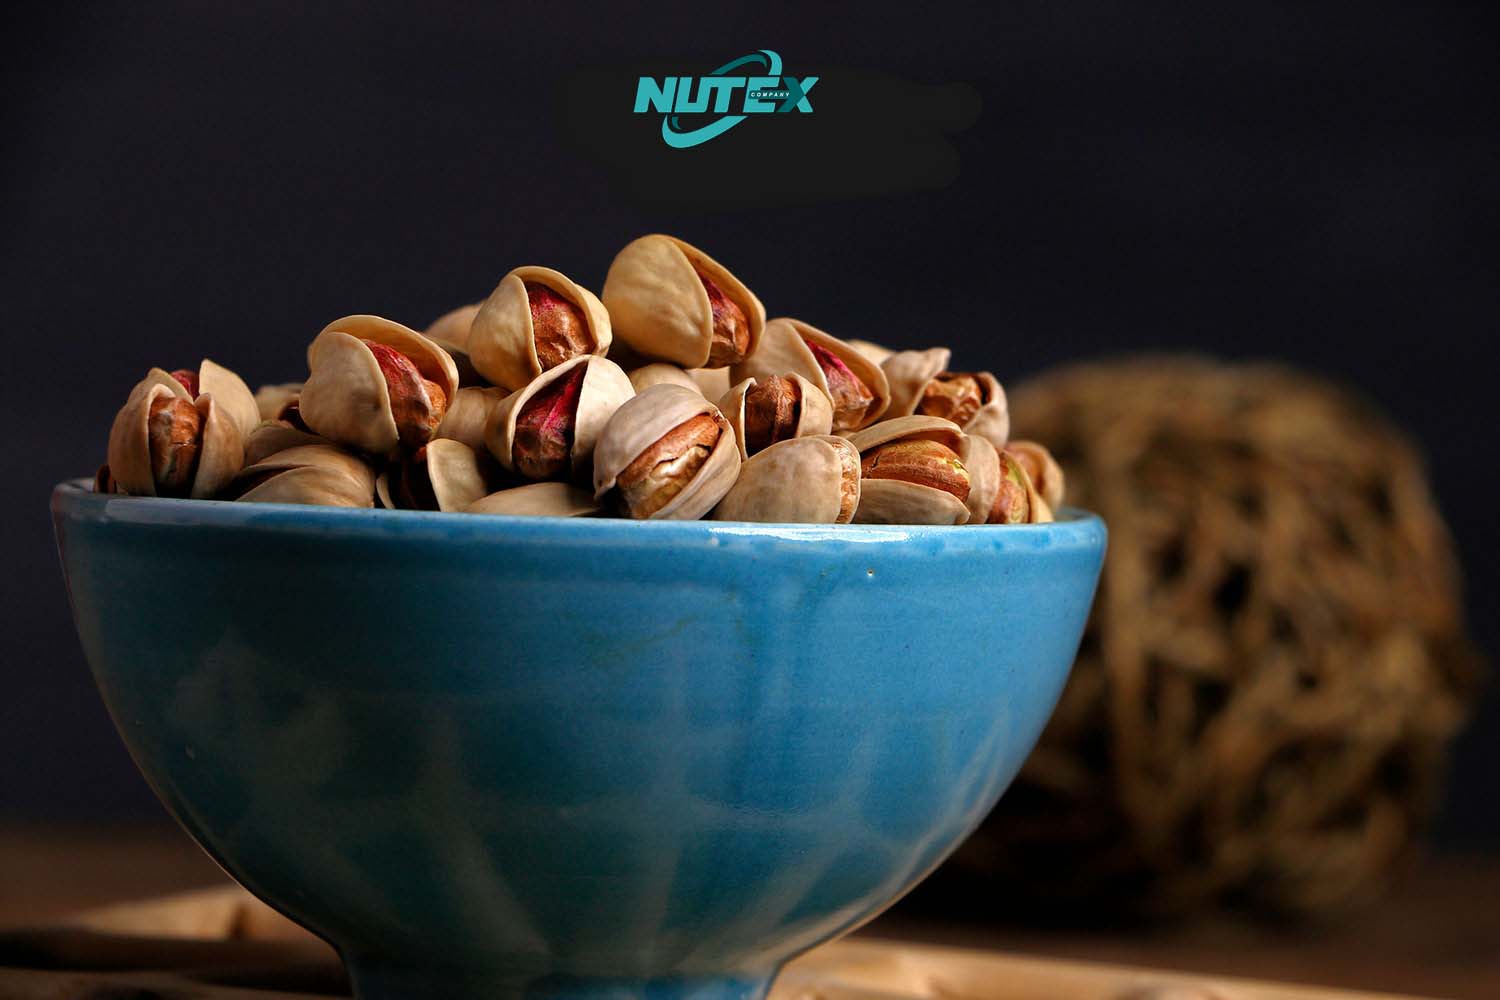 Types of pistachios produced in Iran - The Best Pistachio Suppliers in Iran - Nutex Company